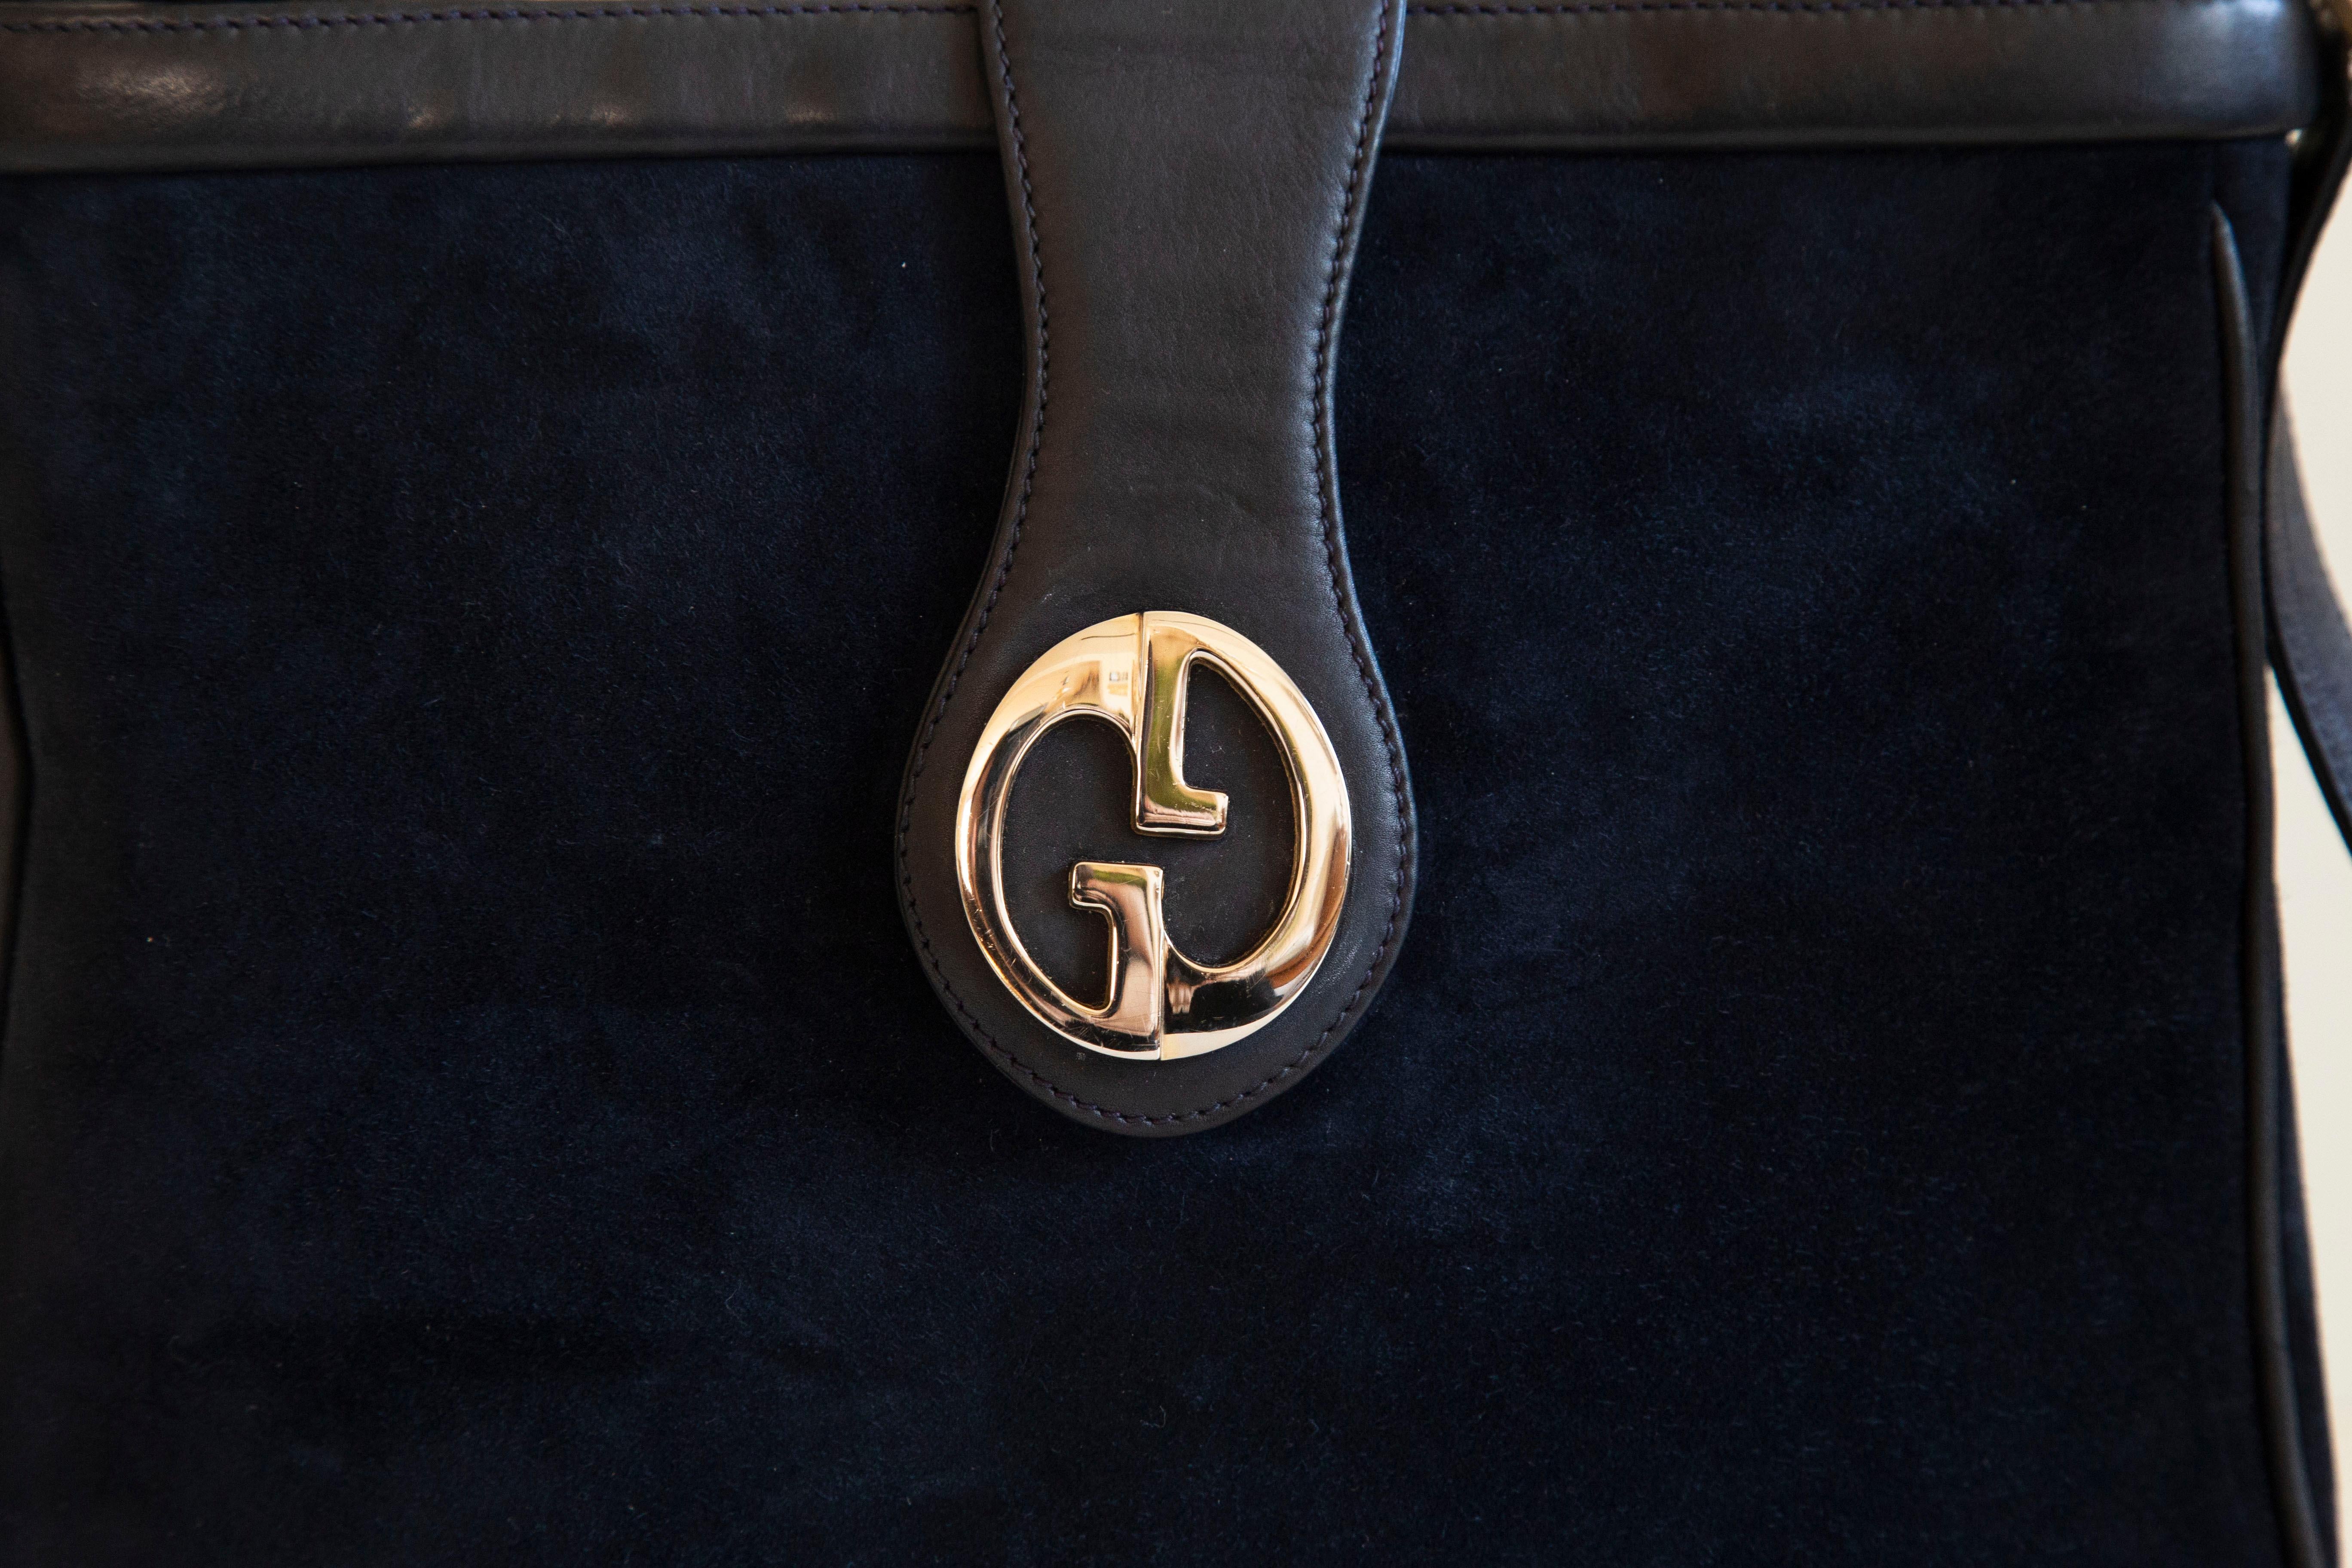 A vintage Gucci GG shoulder bag ca. 1970s, Italy. This bag features a dark blue suede exterior, silver tone GG hardware, and soft dark blue leather trim. The interior is lined with dark blue leather and there are two side pockets with a zipper. The